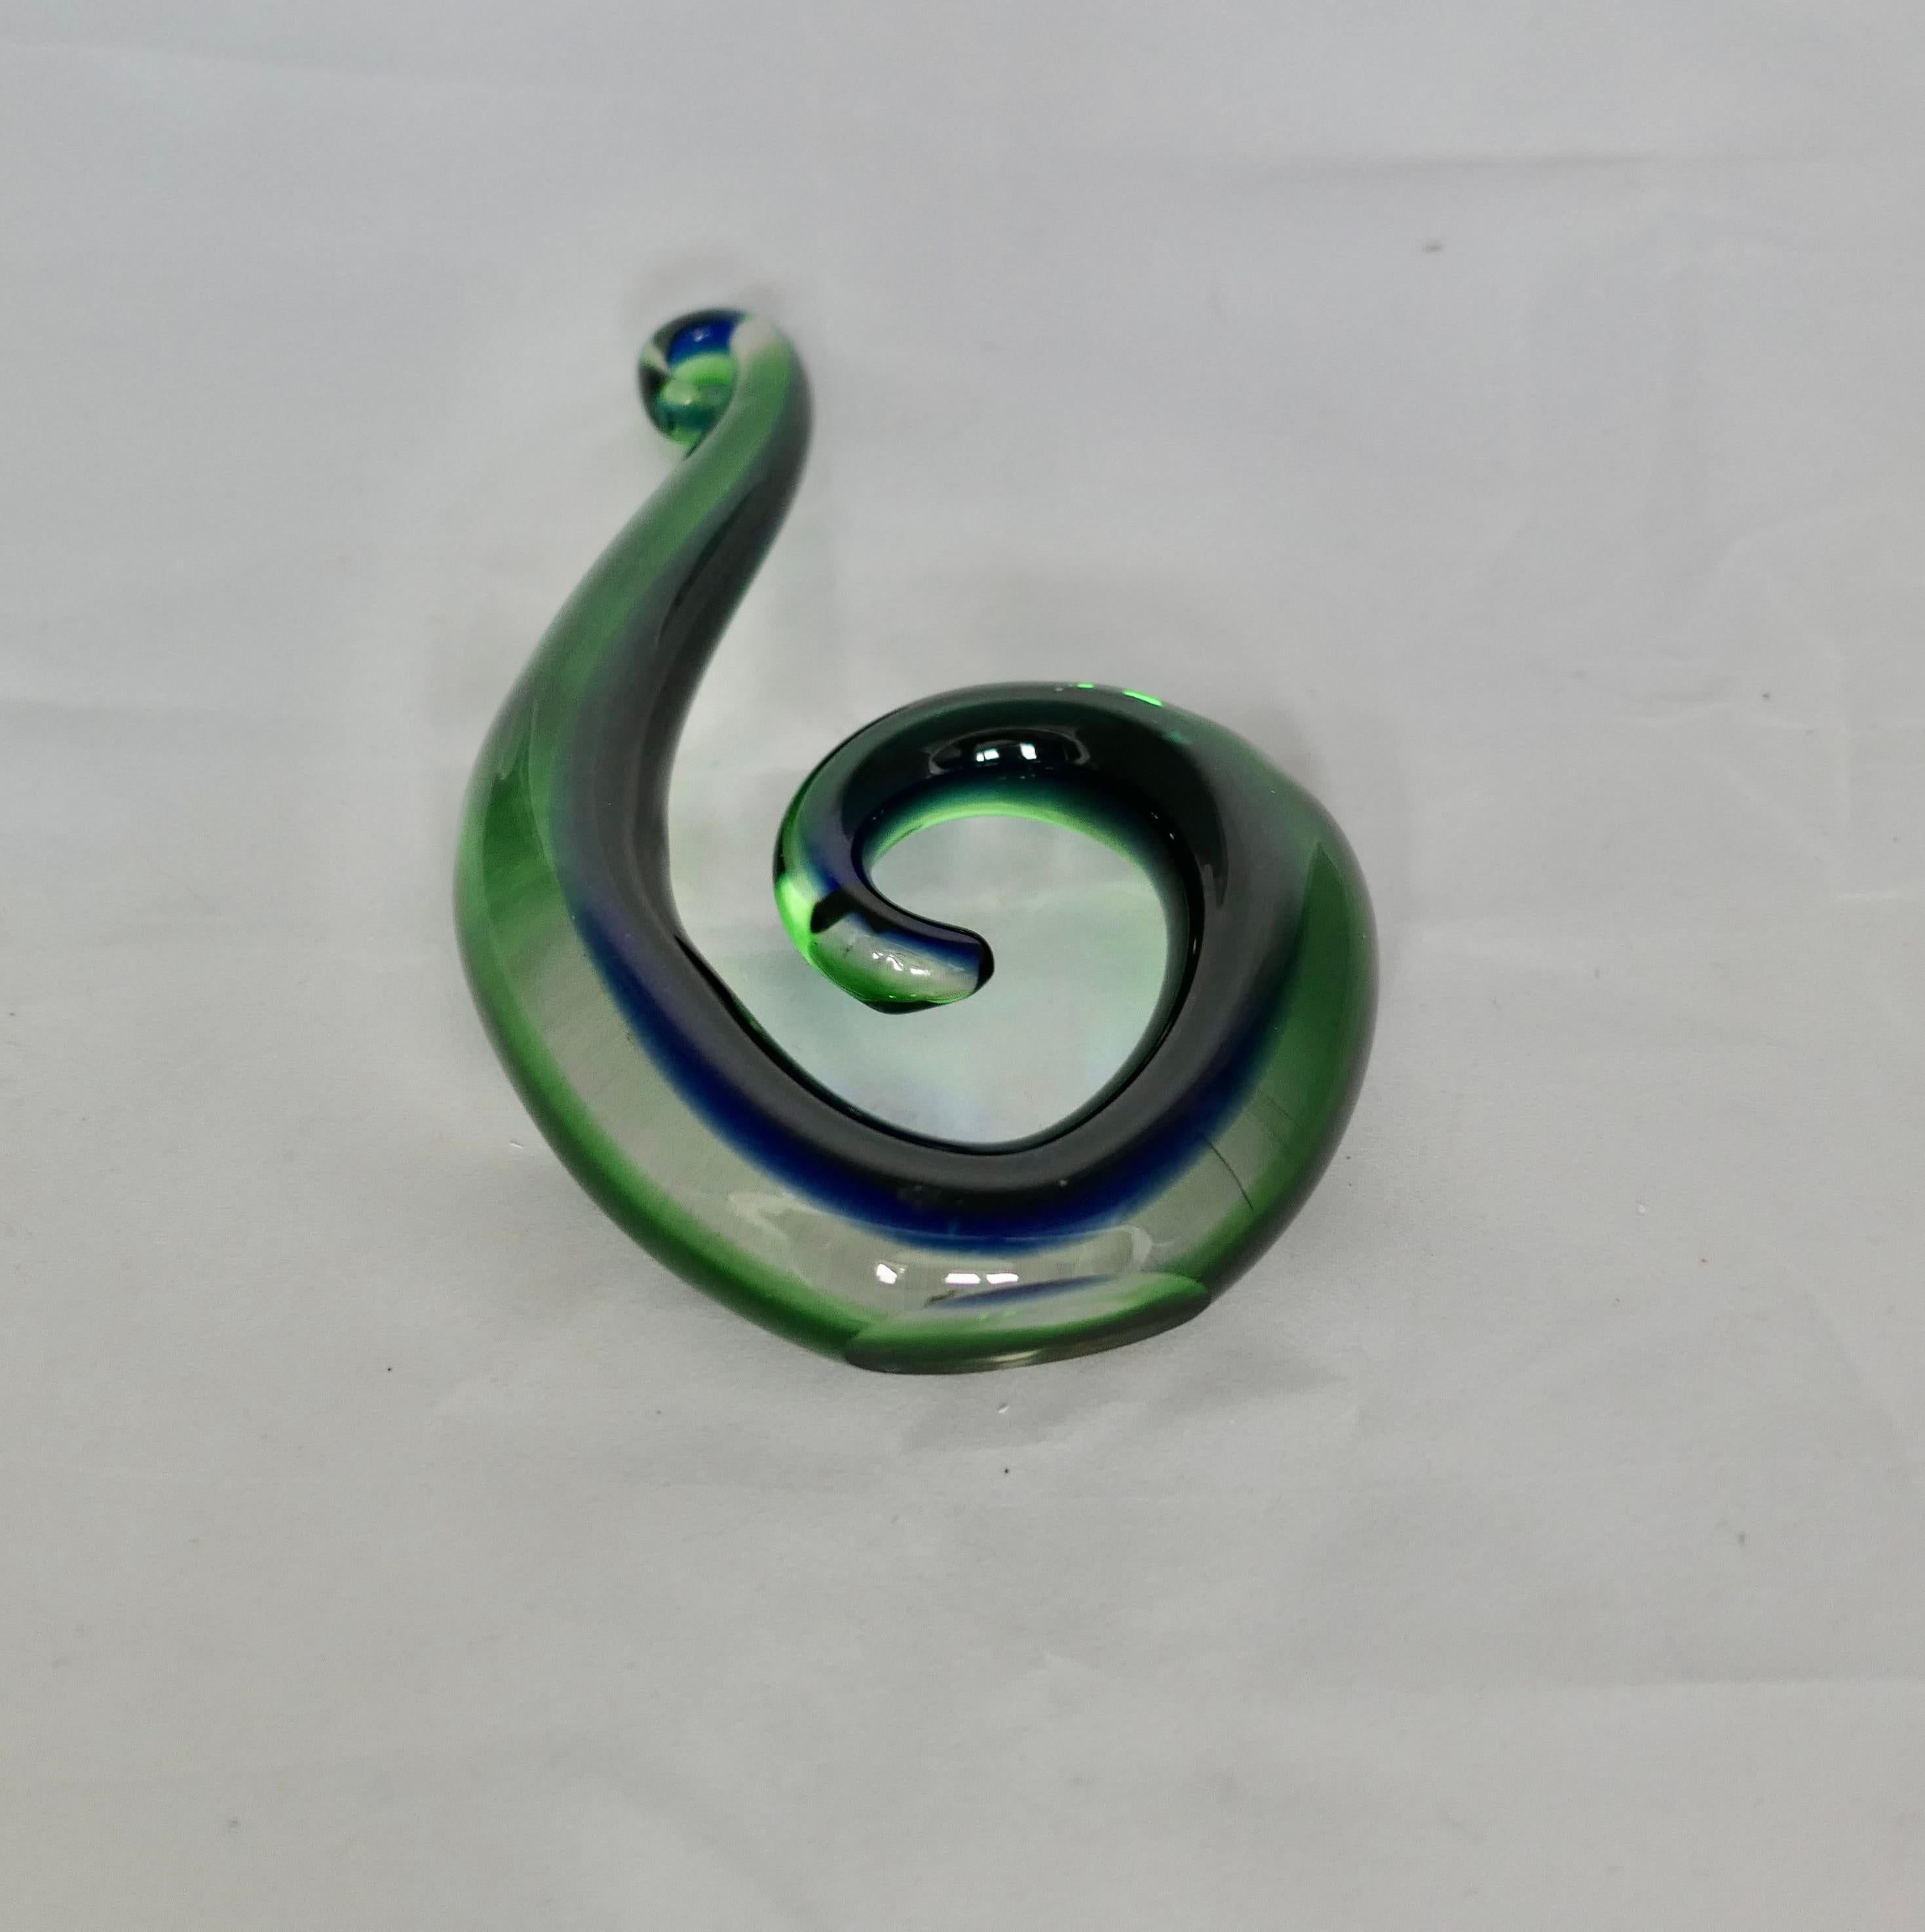 Vintage Murano Hand Crafted Green and Blue Koru  Representing a Fern Frond   For Sale 2